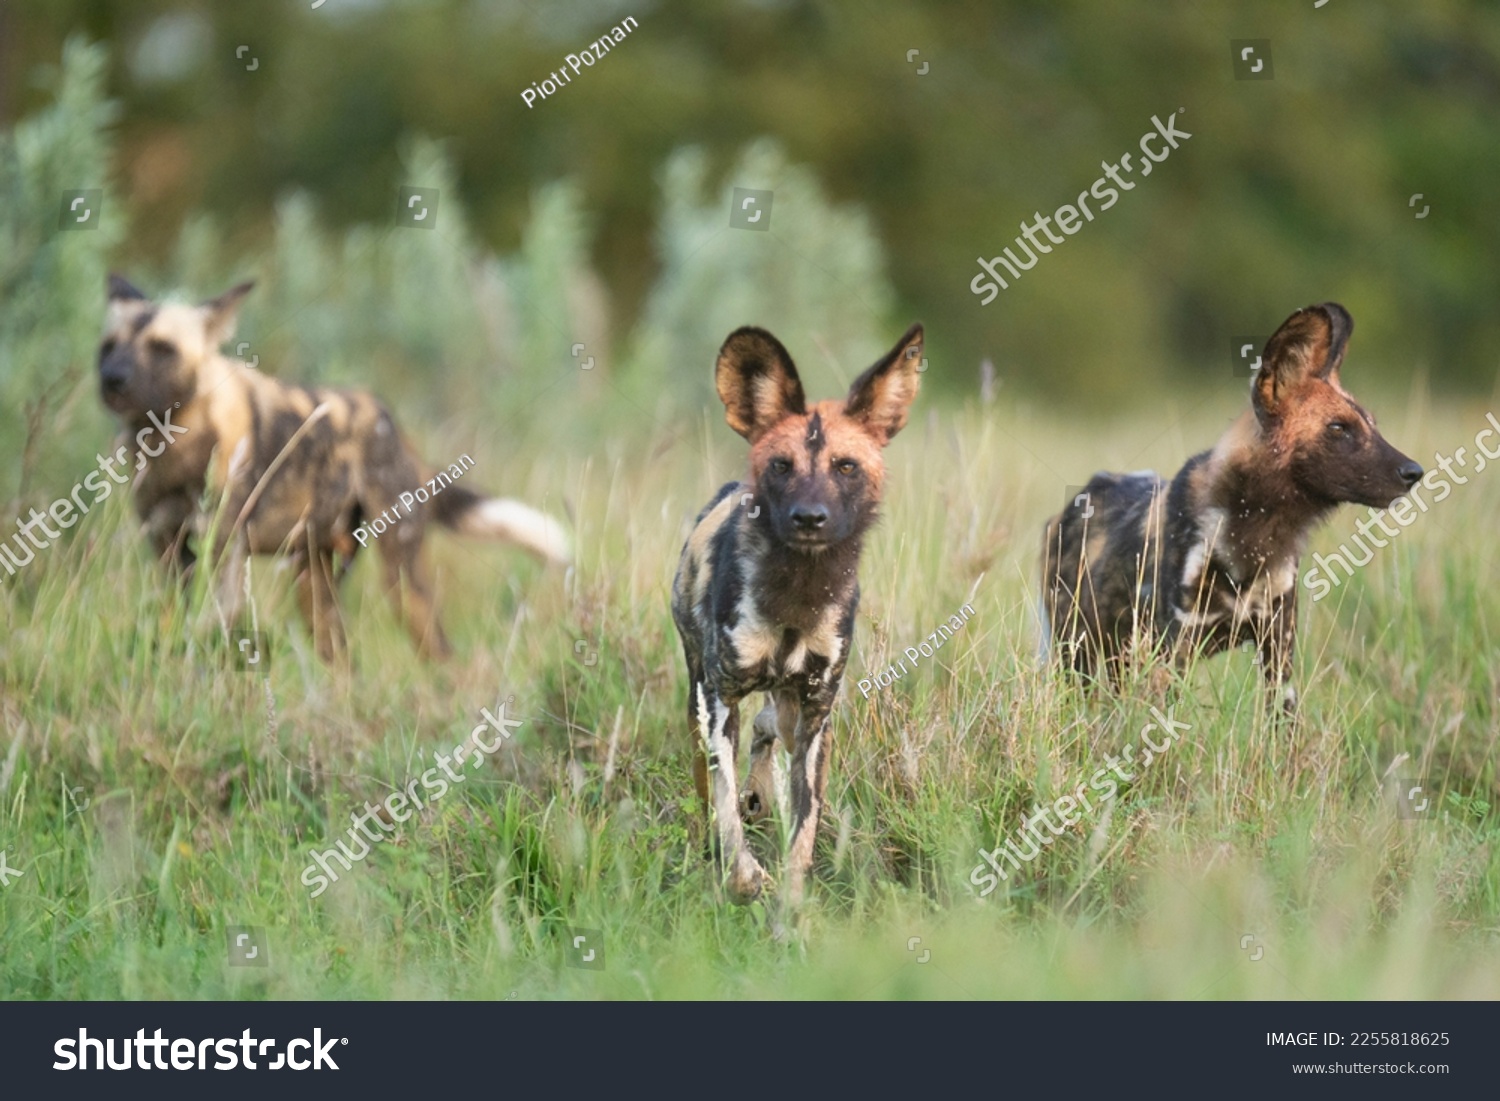 Pack of african wild dogs - Lycaon pictus - walking on ground with green vegetation in background. Photo Kruger National Park in South Africa. #2255818625